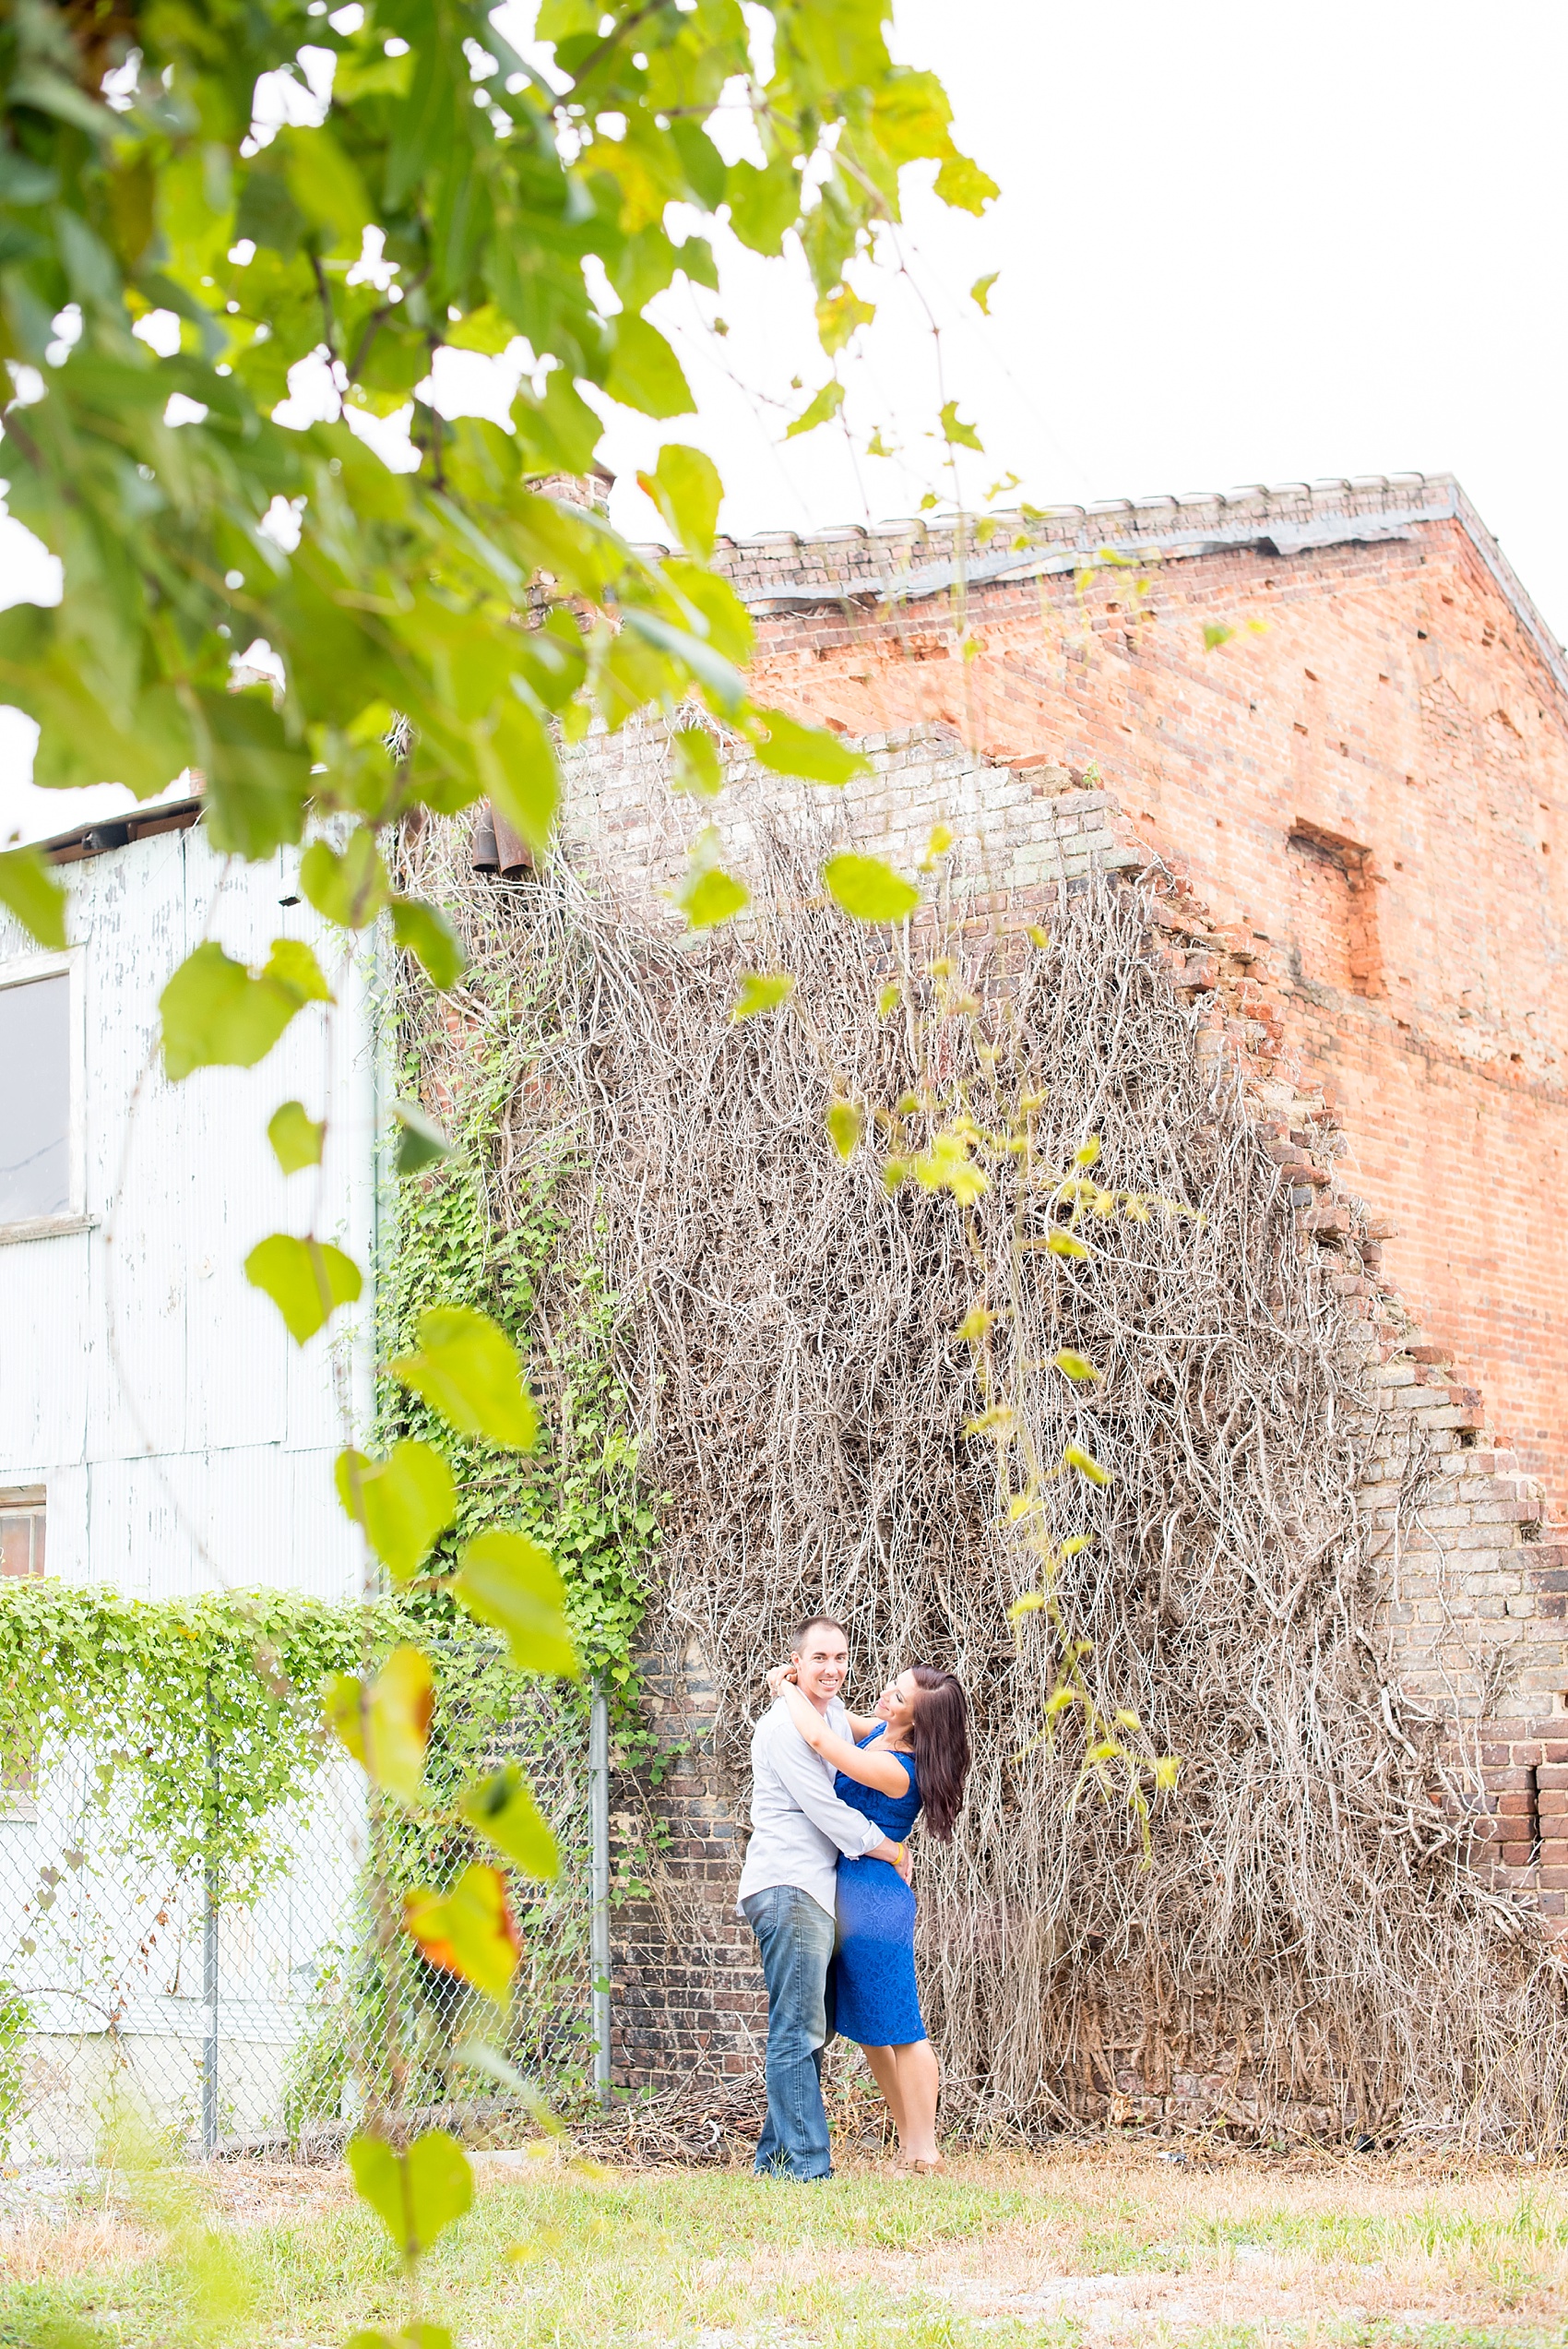 Downtown Raleigh urban industrial engagement photos by Mikkel Paige Photography.